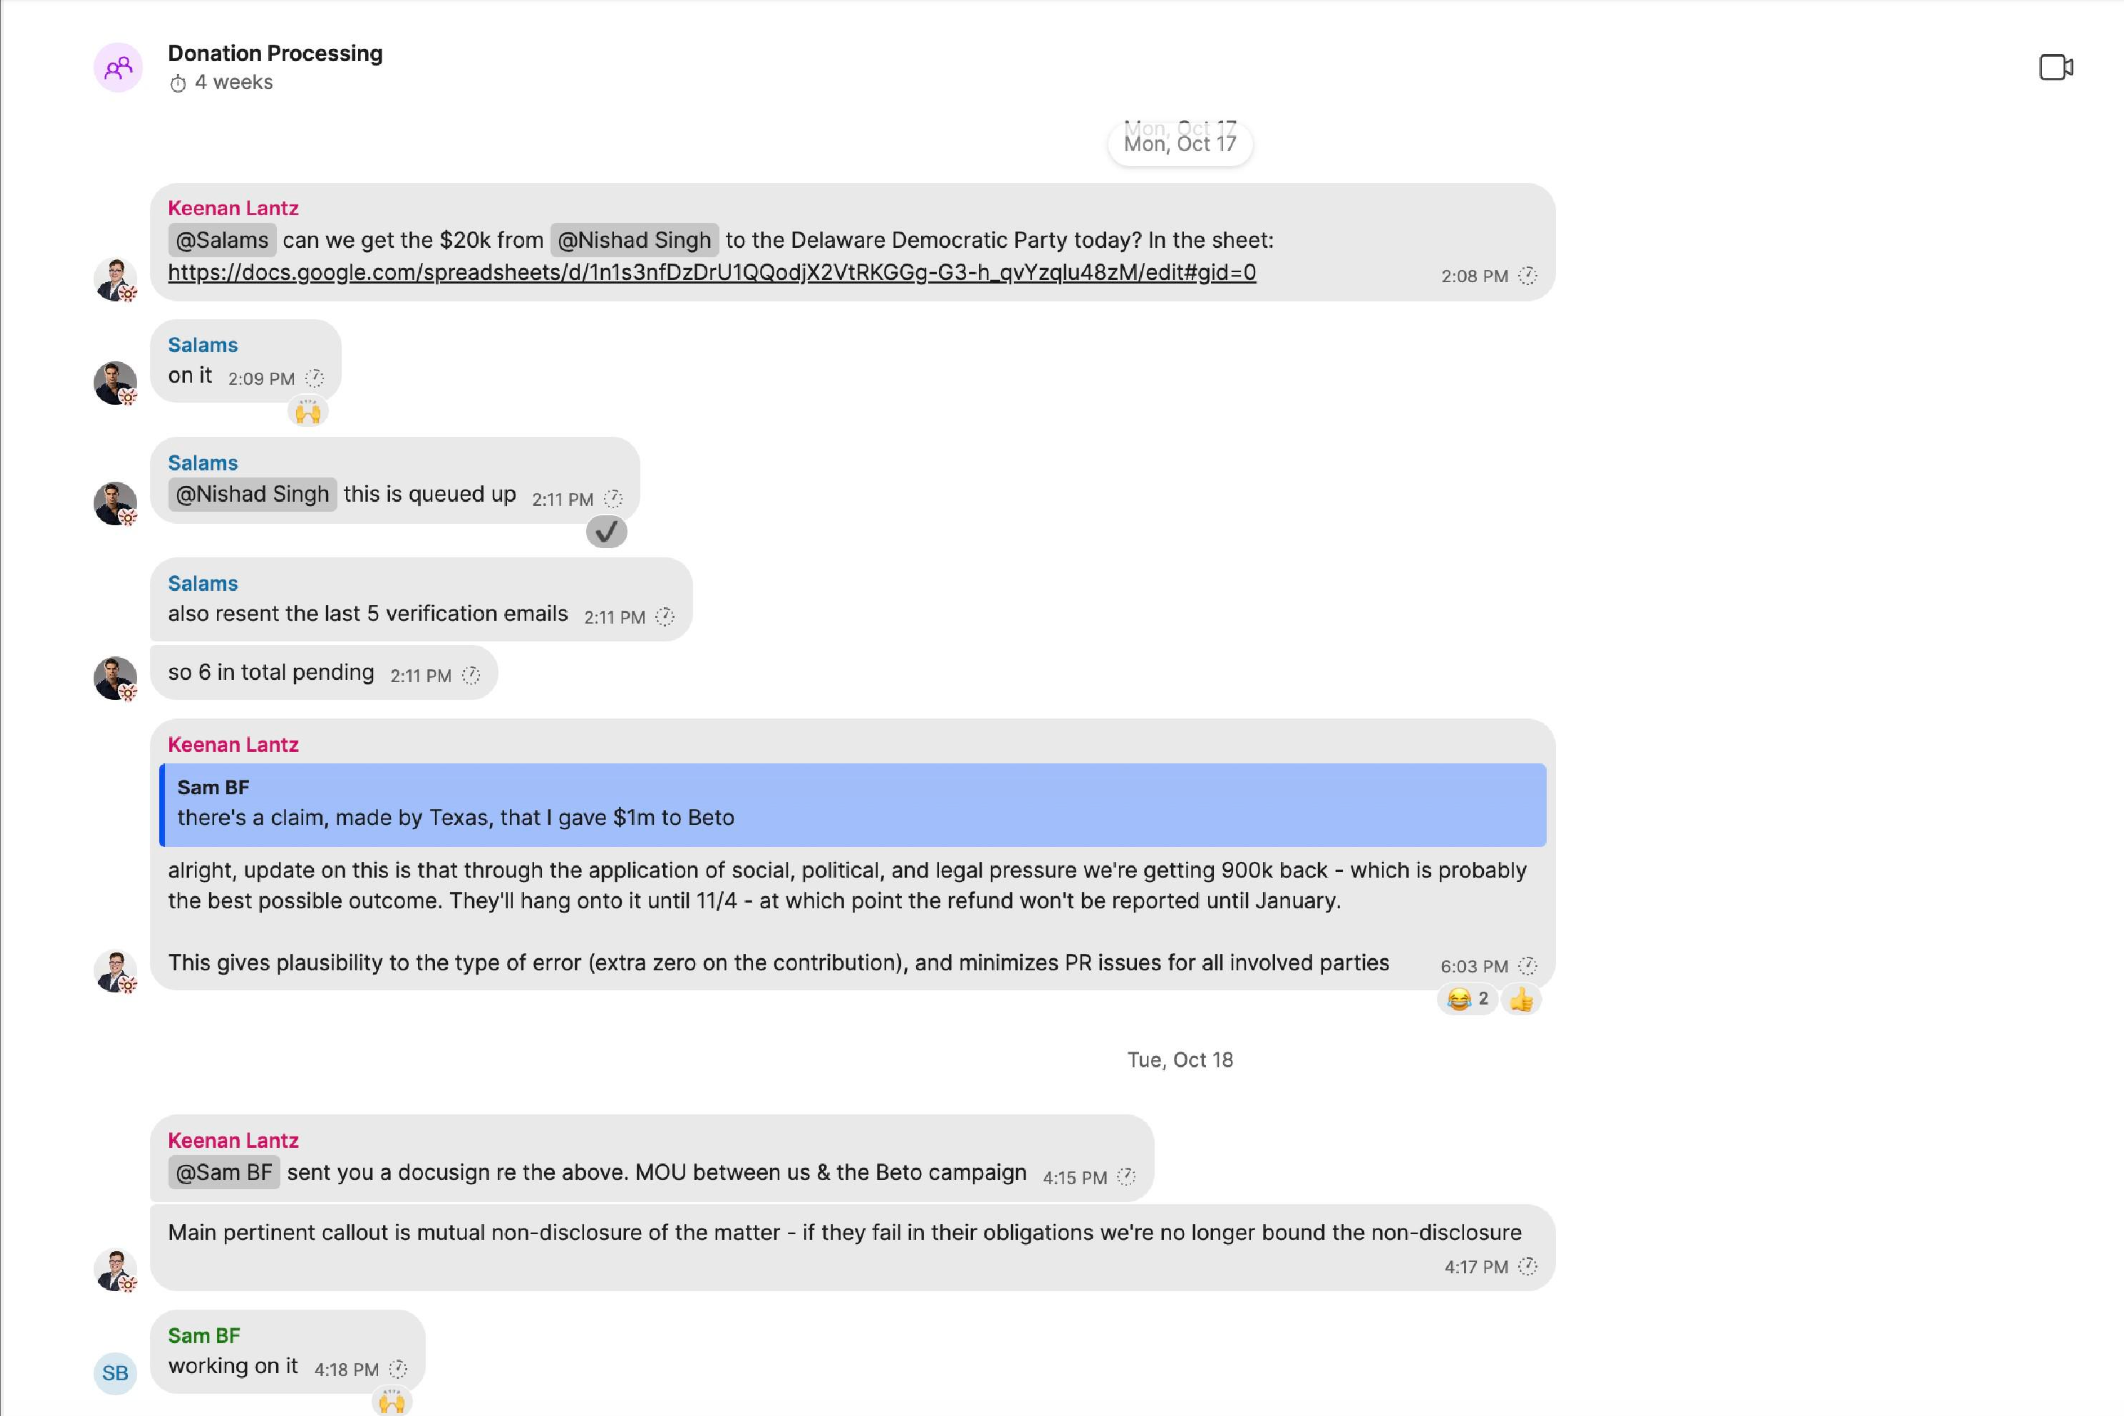 An Oct. 17, 2022, conversation in the "Donation Processing" Signal group chat, showing Keenan Lantz and Ryan Salame working to coordinate political donations that will be sent under Nishad Singh's and Sam Bankman-Fried's names, respectively, to the Delaware Democratic Party and the Beto O'Rourke gubernatorial campaign.